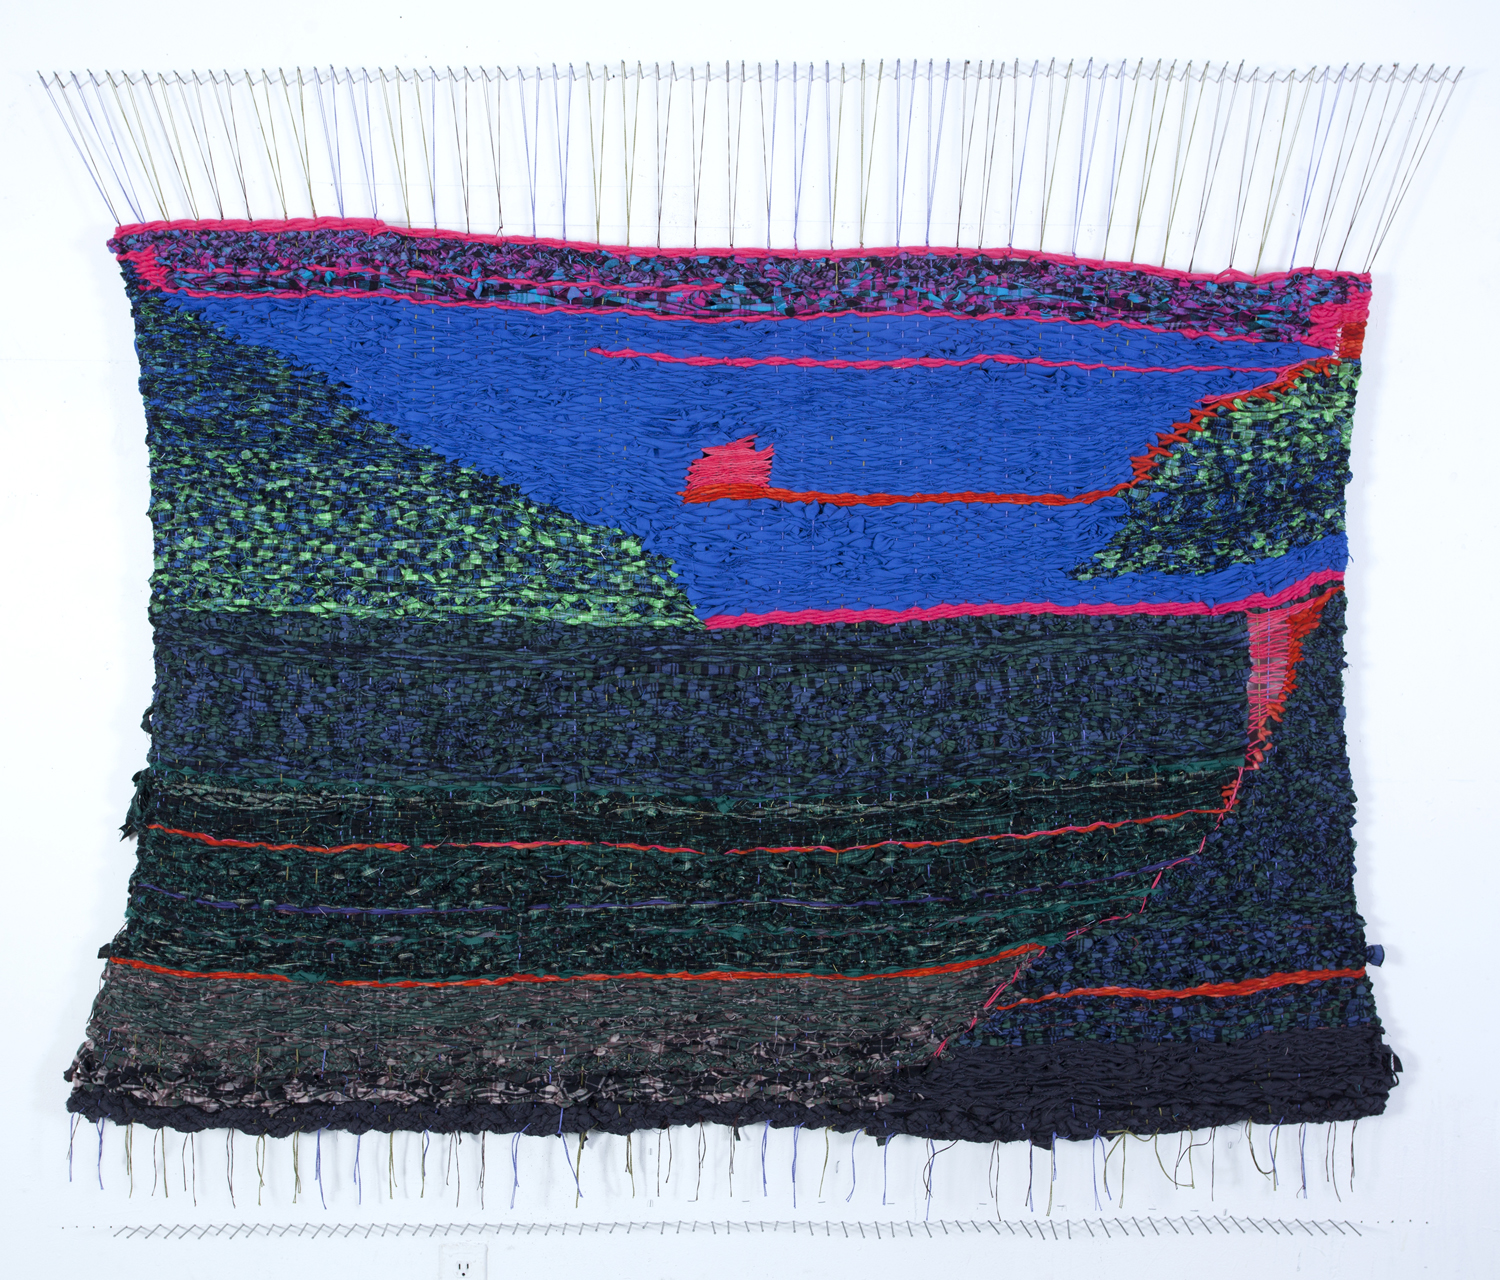  Stacey Piwinski,  Envelope of Sadness , Flannel remnants, yarn and string, 49x78 